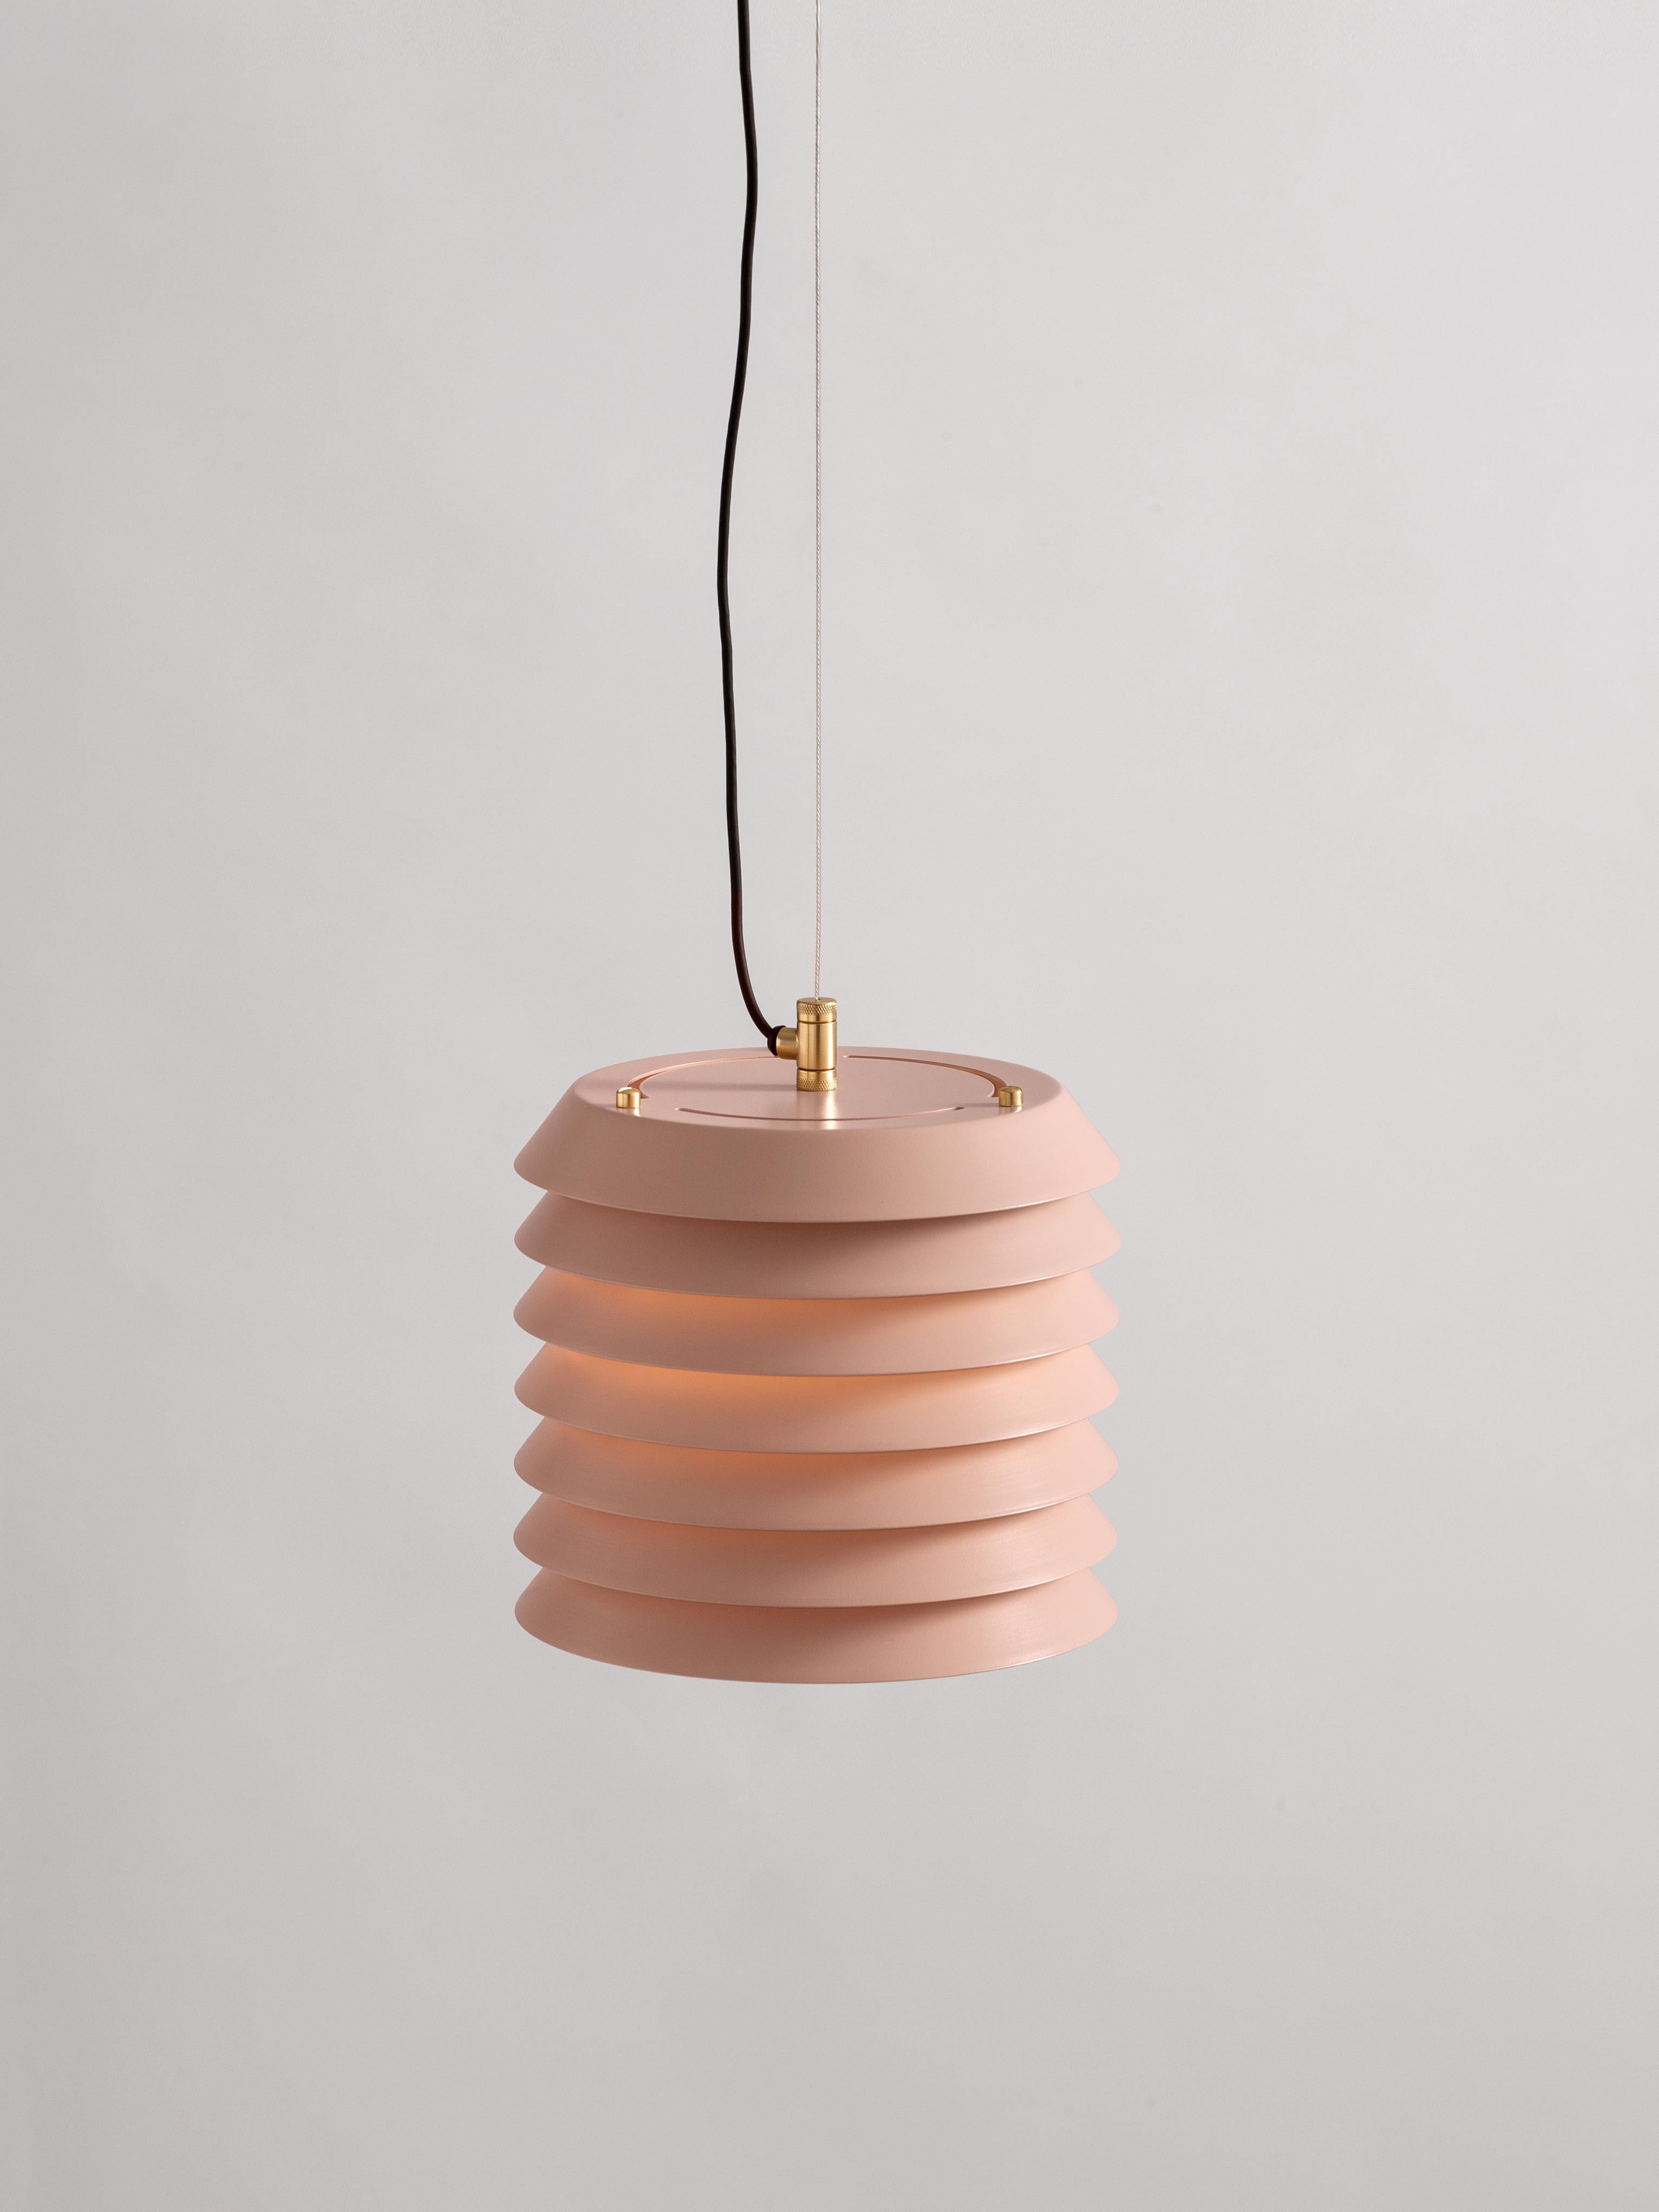 Rose maija 15 pendant lamp by Ilmari Tapiovaara
Dimensions: D 15 x H 14 cm
Materials: Metal, glass.
Available in white or nude rose.

Maija conveys the feeling of light typical of Baltic cities, where the streets are barely illuminated, apart